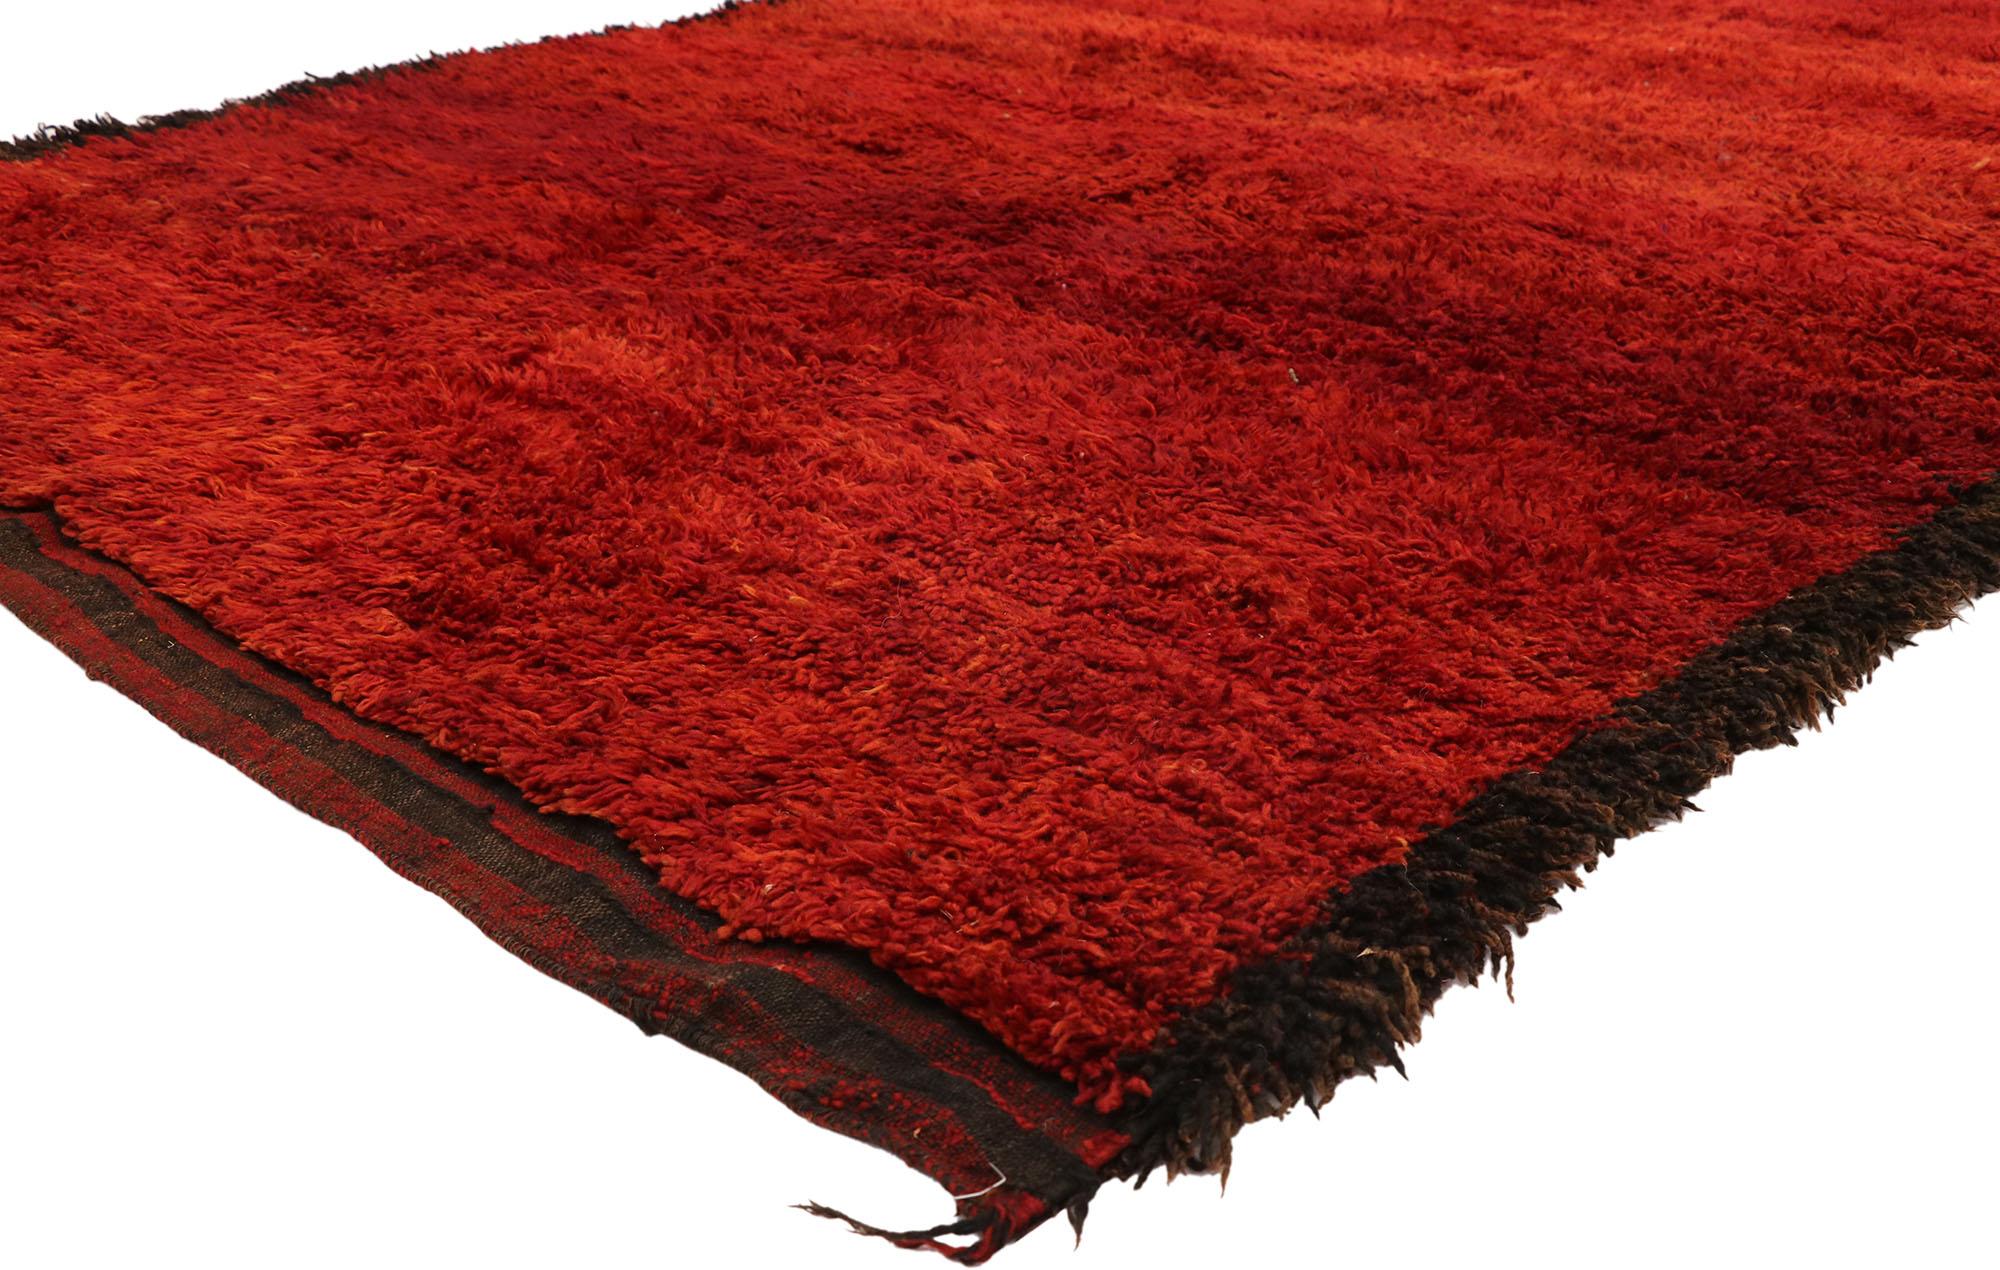 21015, vintage red Moroccan rug, Berber shag rug with Retro modern style. This hand knotted wool vintage red Moroccan rug emanates function and versatility while staying true to the authentic spirit of Berber tribe culture. Featuring a luminous